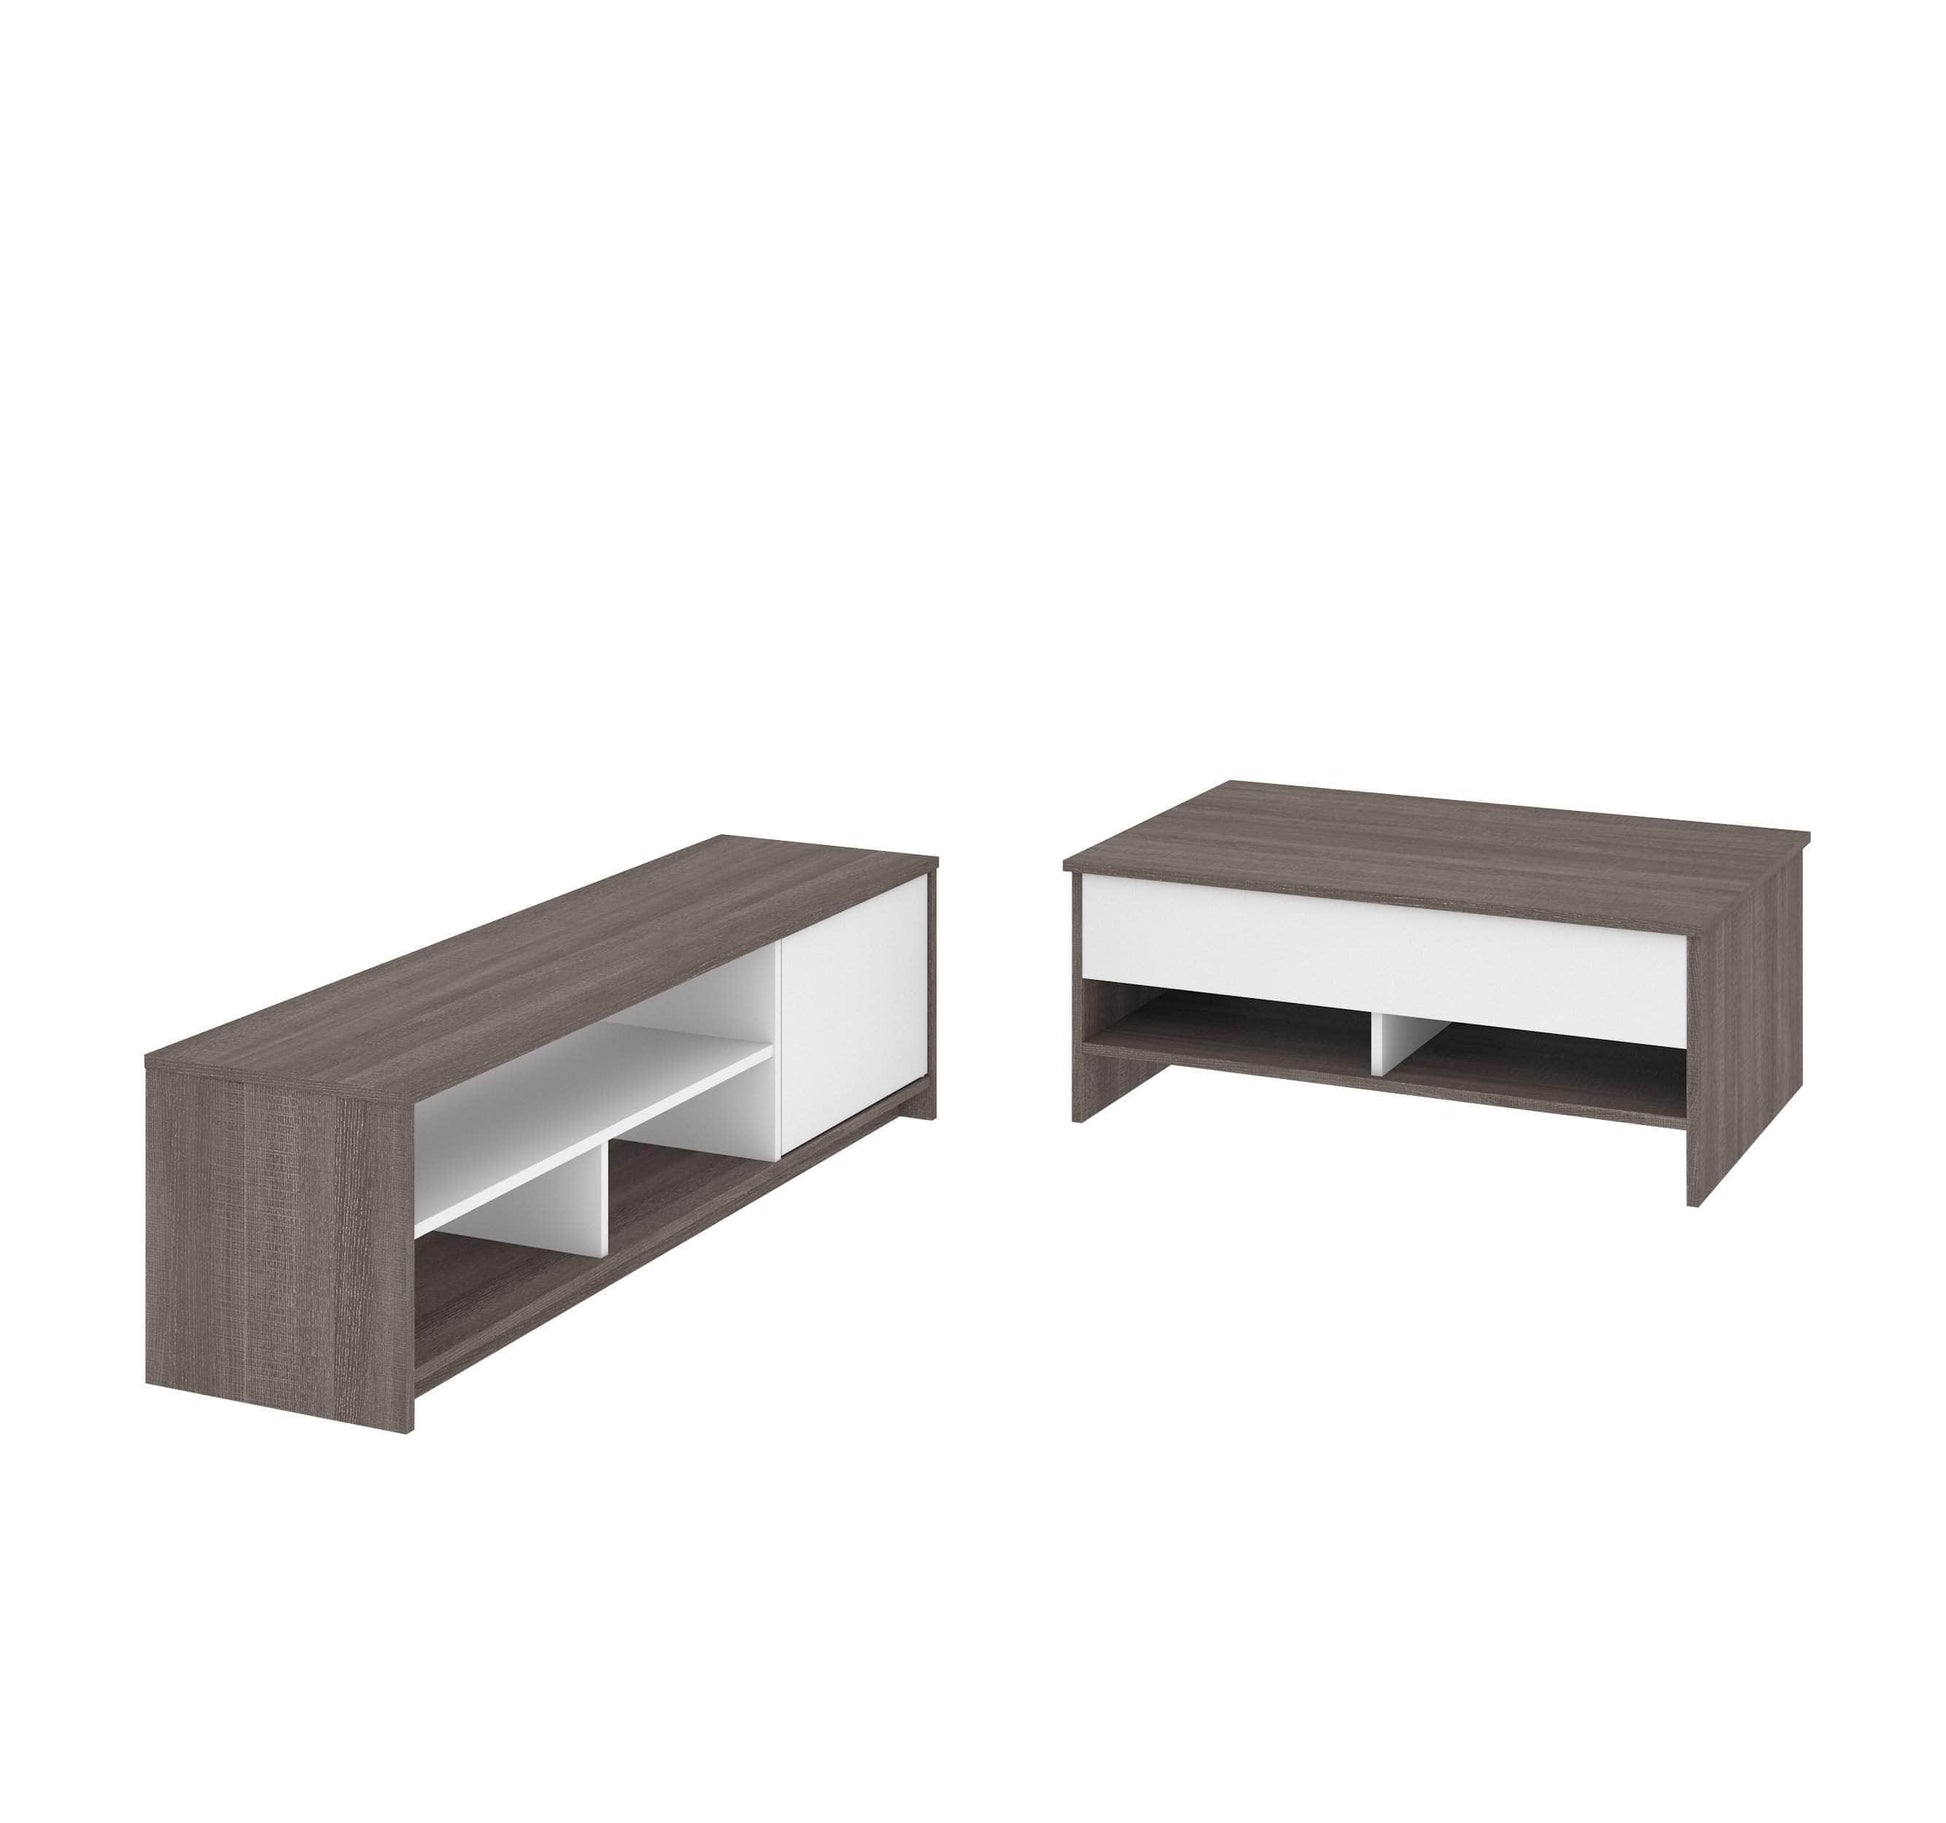 Modubox Coffee Table Bark Grey & White Small Space 2-Piece Set Including a Lift-Top Coffee Table and a TV Stand - Available in 2 Colours